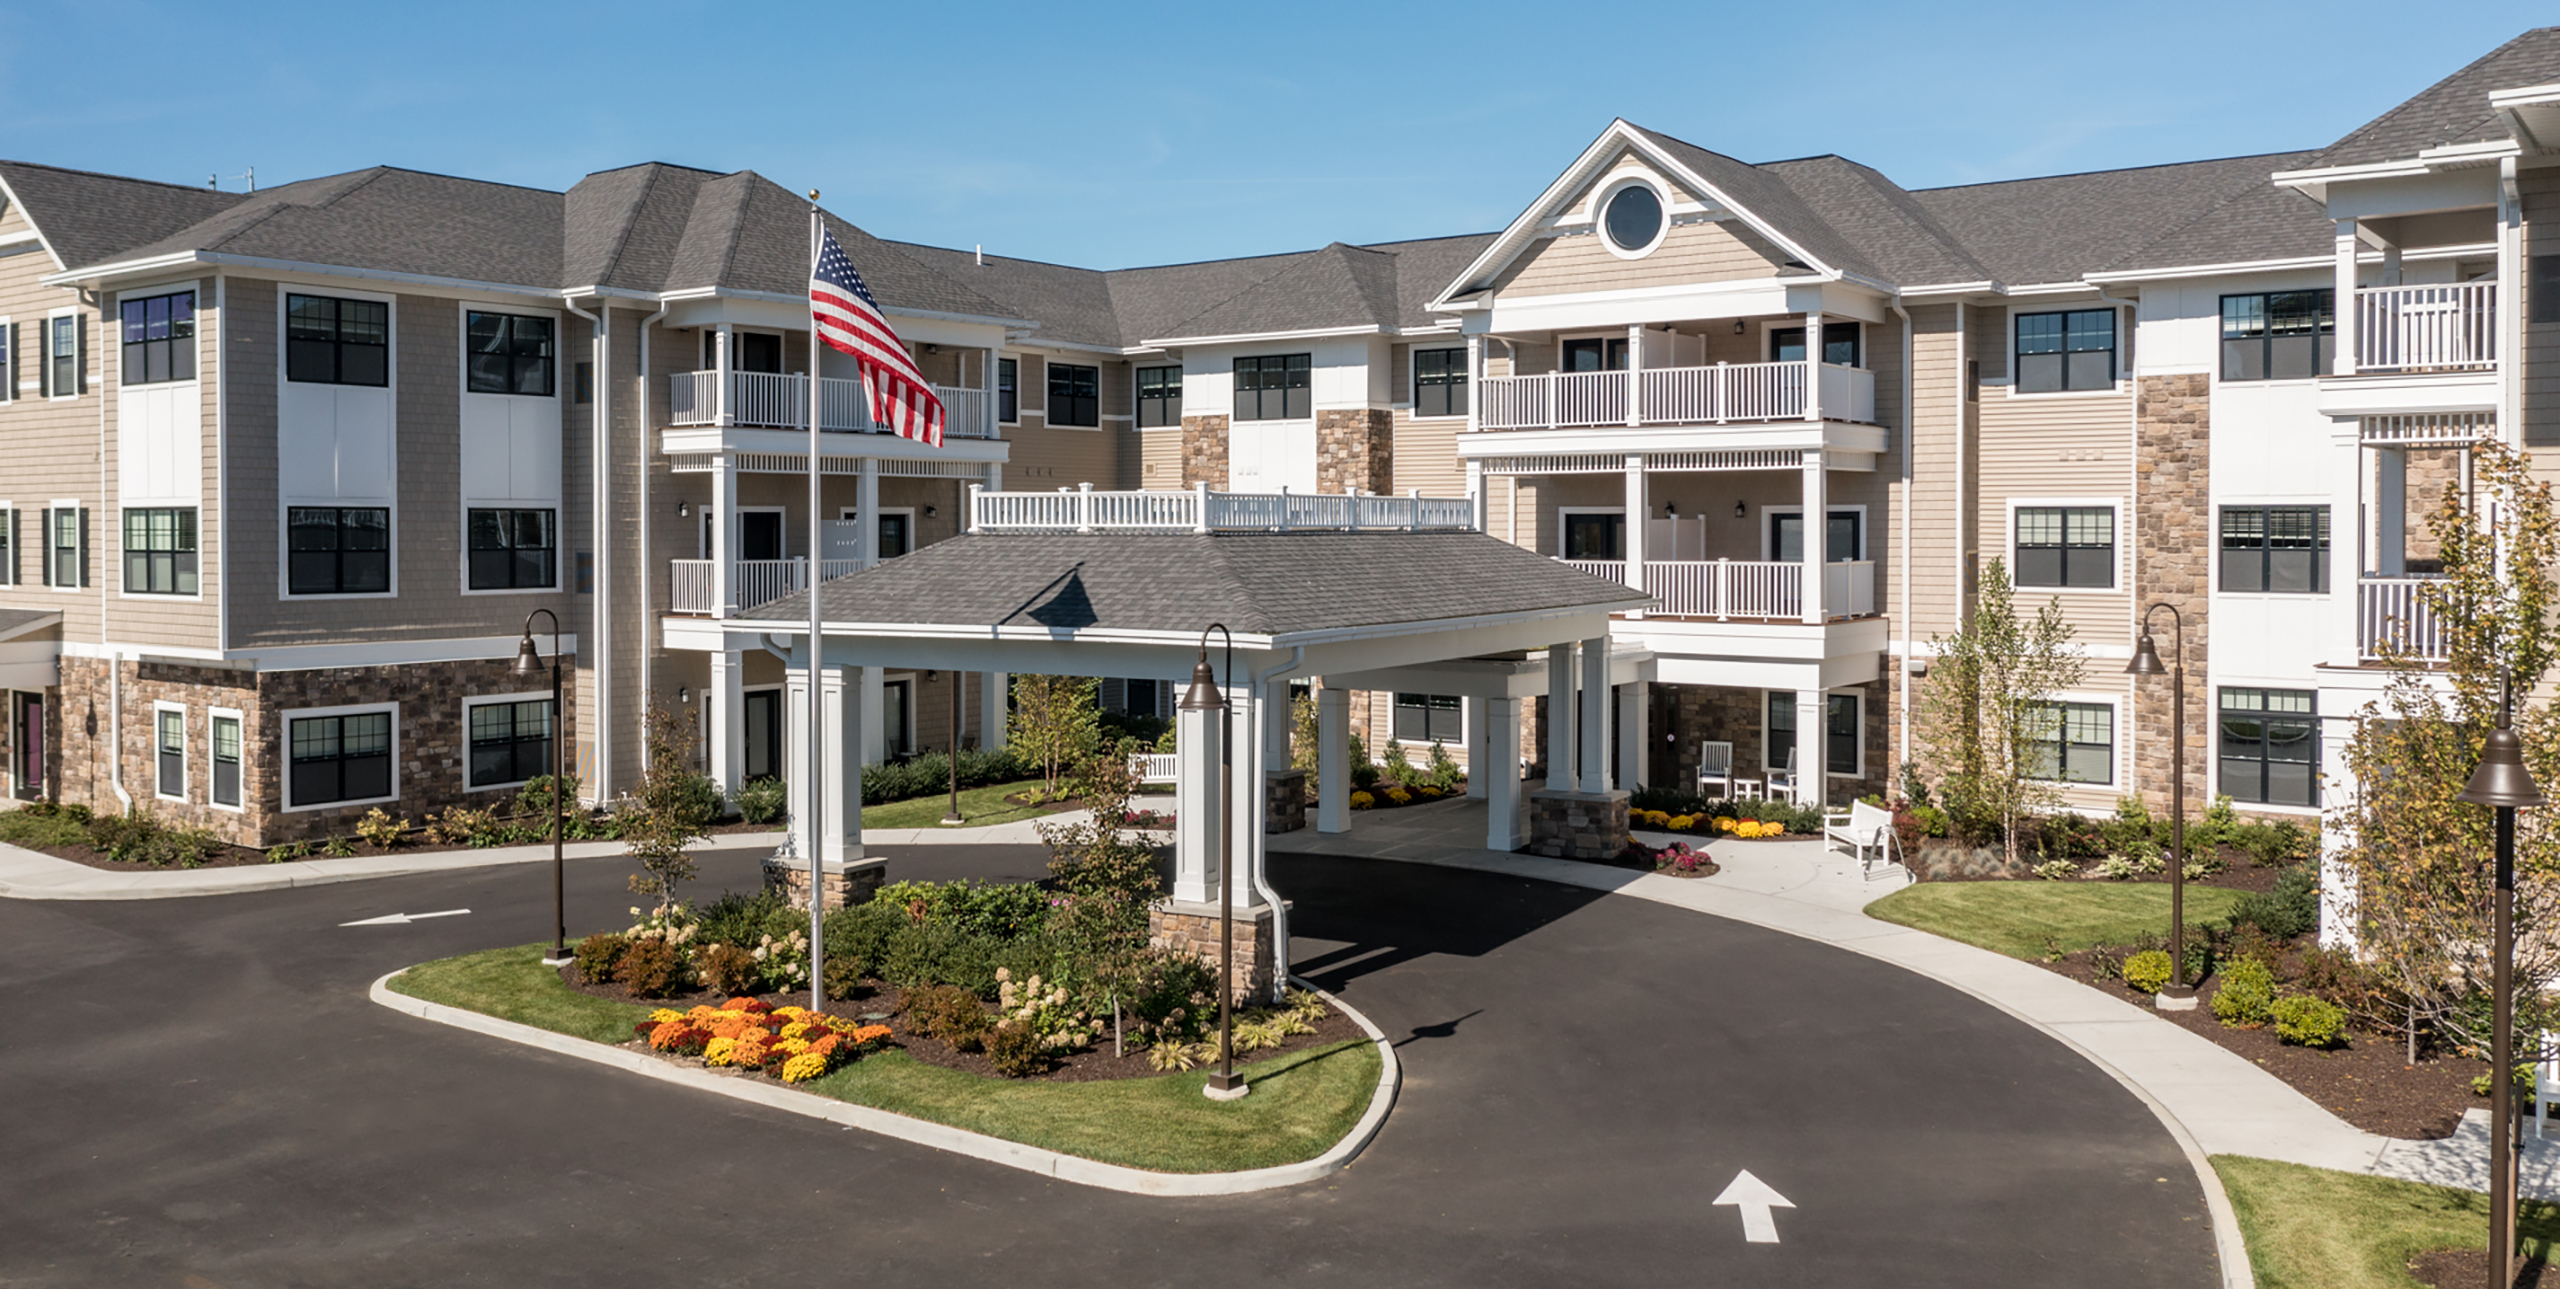 The entrance to Brightview Senior Living in Port Jefferson Station